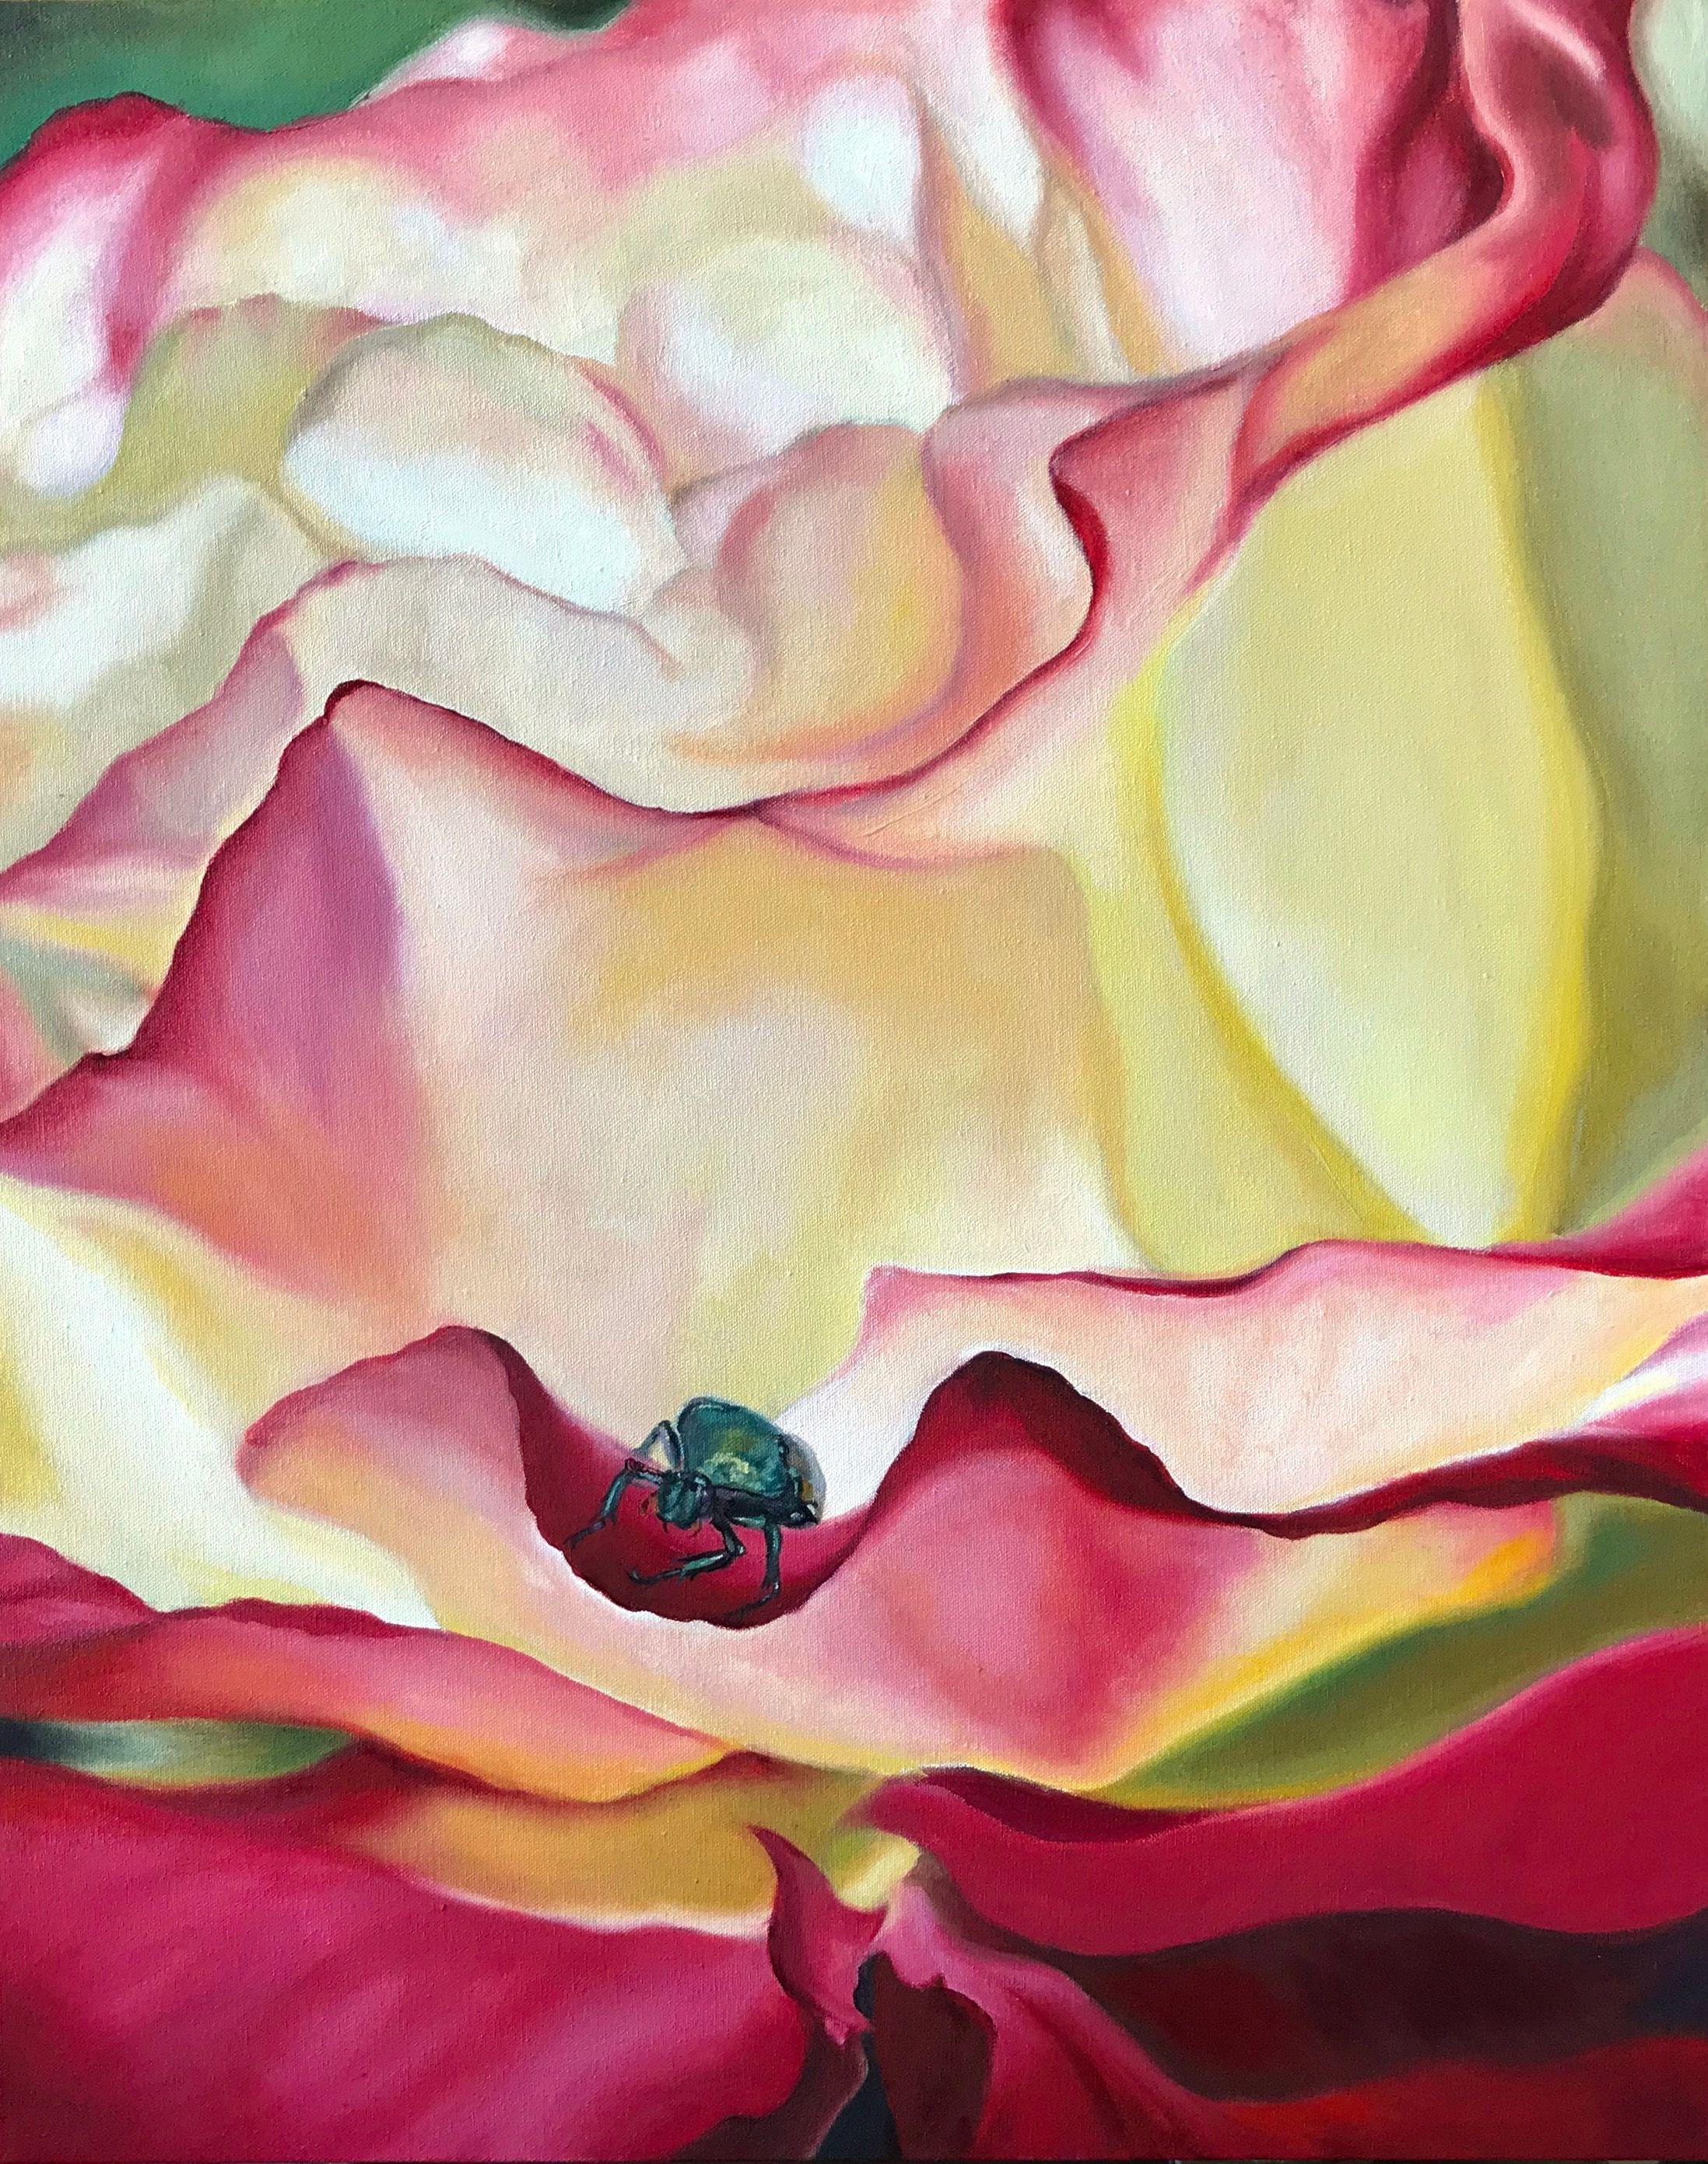 Pollinators Series: Red-edged cream rose seen on edge with a green iridescent Japanese beetle visitor ready to fly away. :: Painting :: Realism :: This piece comes with an official certificate of authenticity signed by the artist :: Ready to Hang: